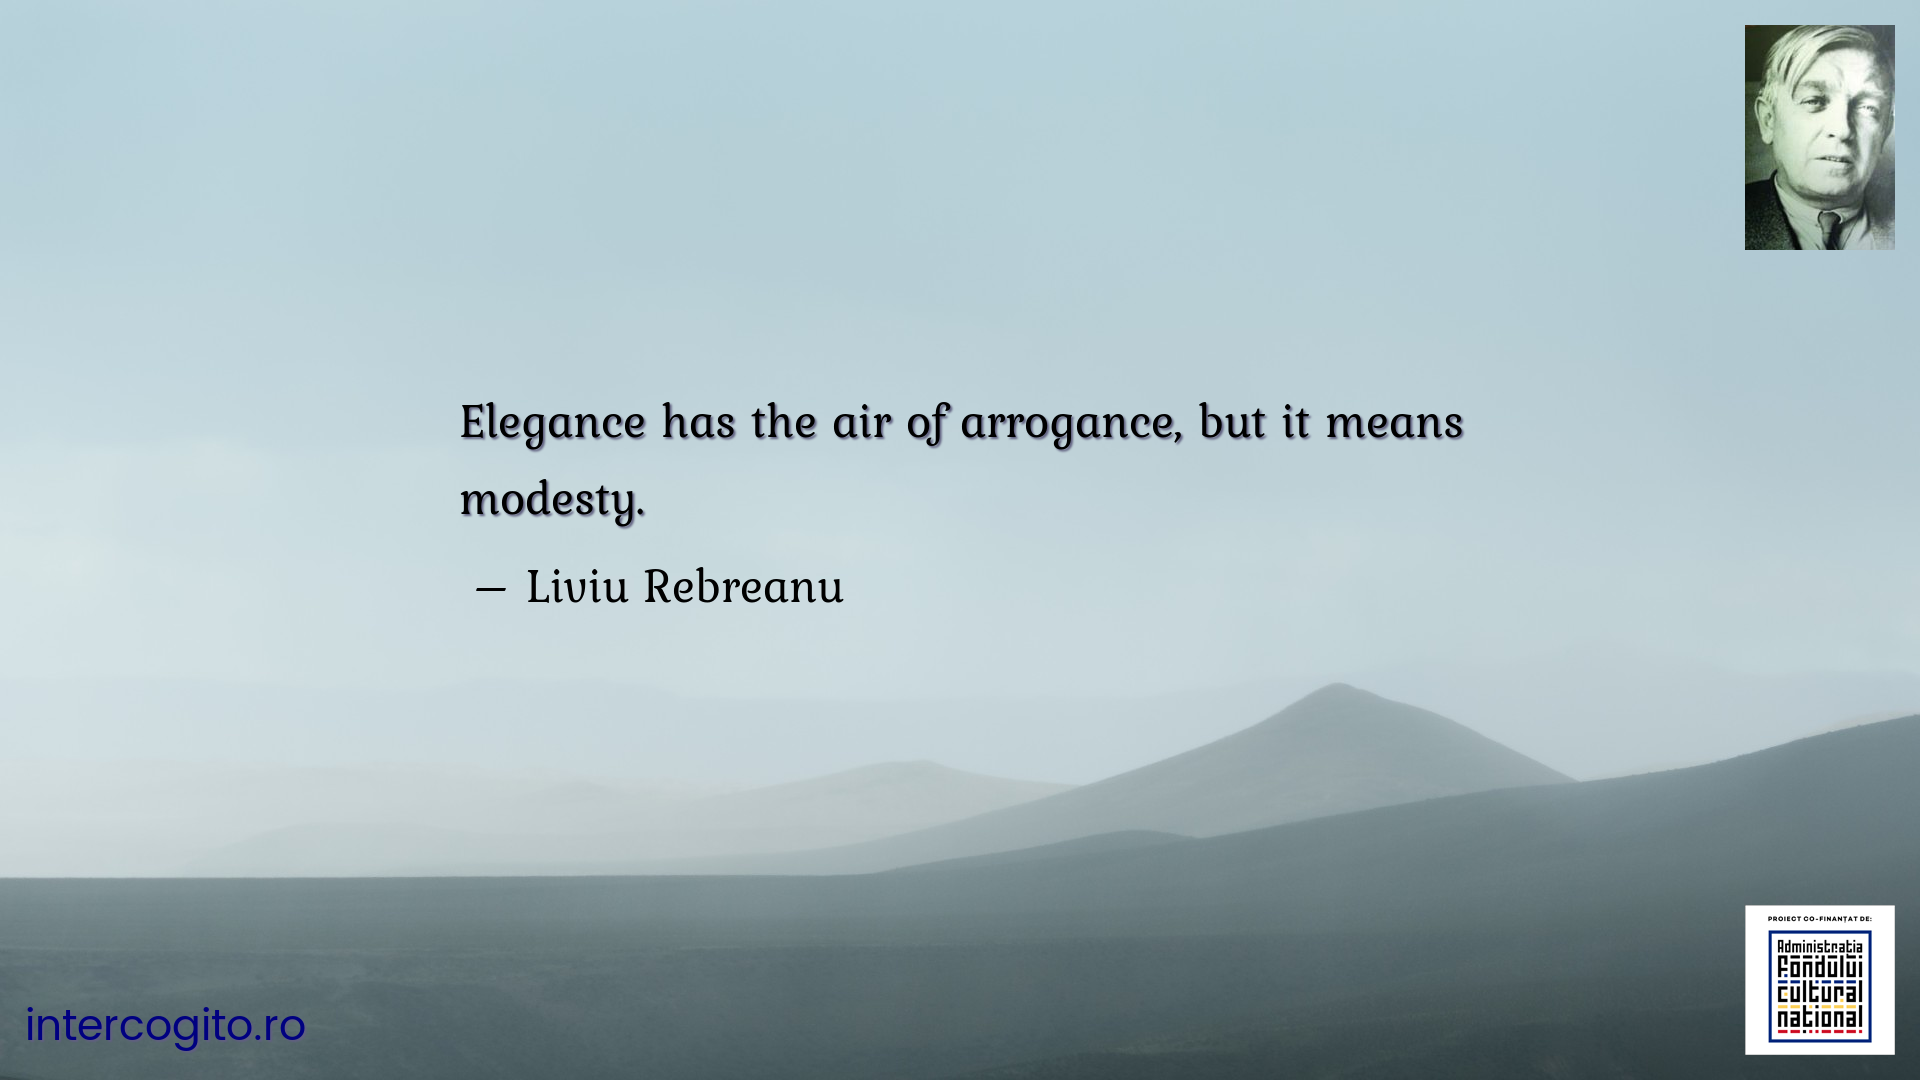 Elegance has the air of arrogance, but it means modesty.